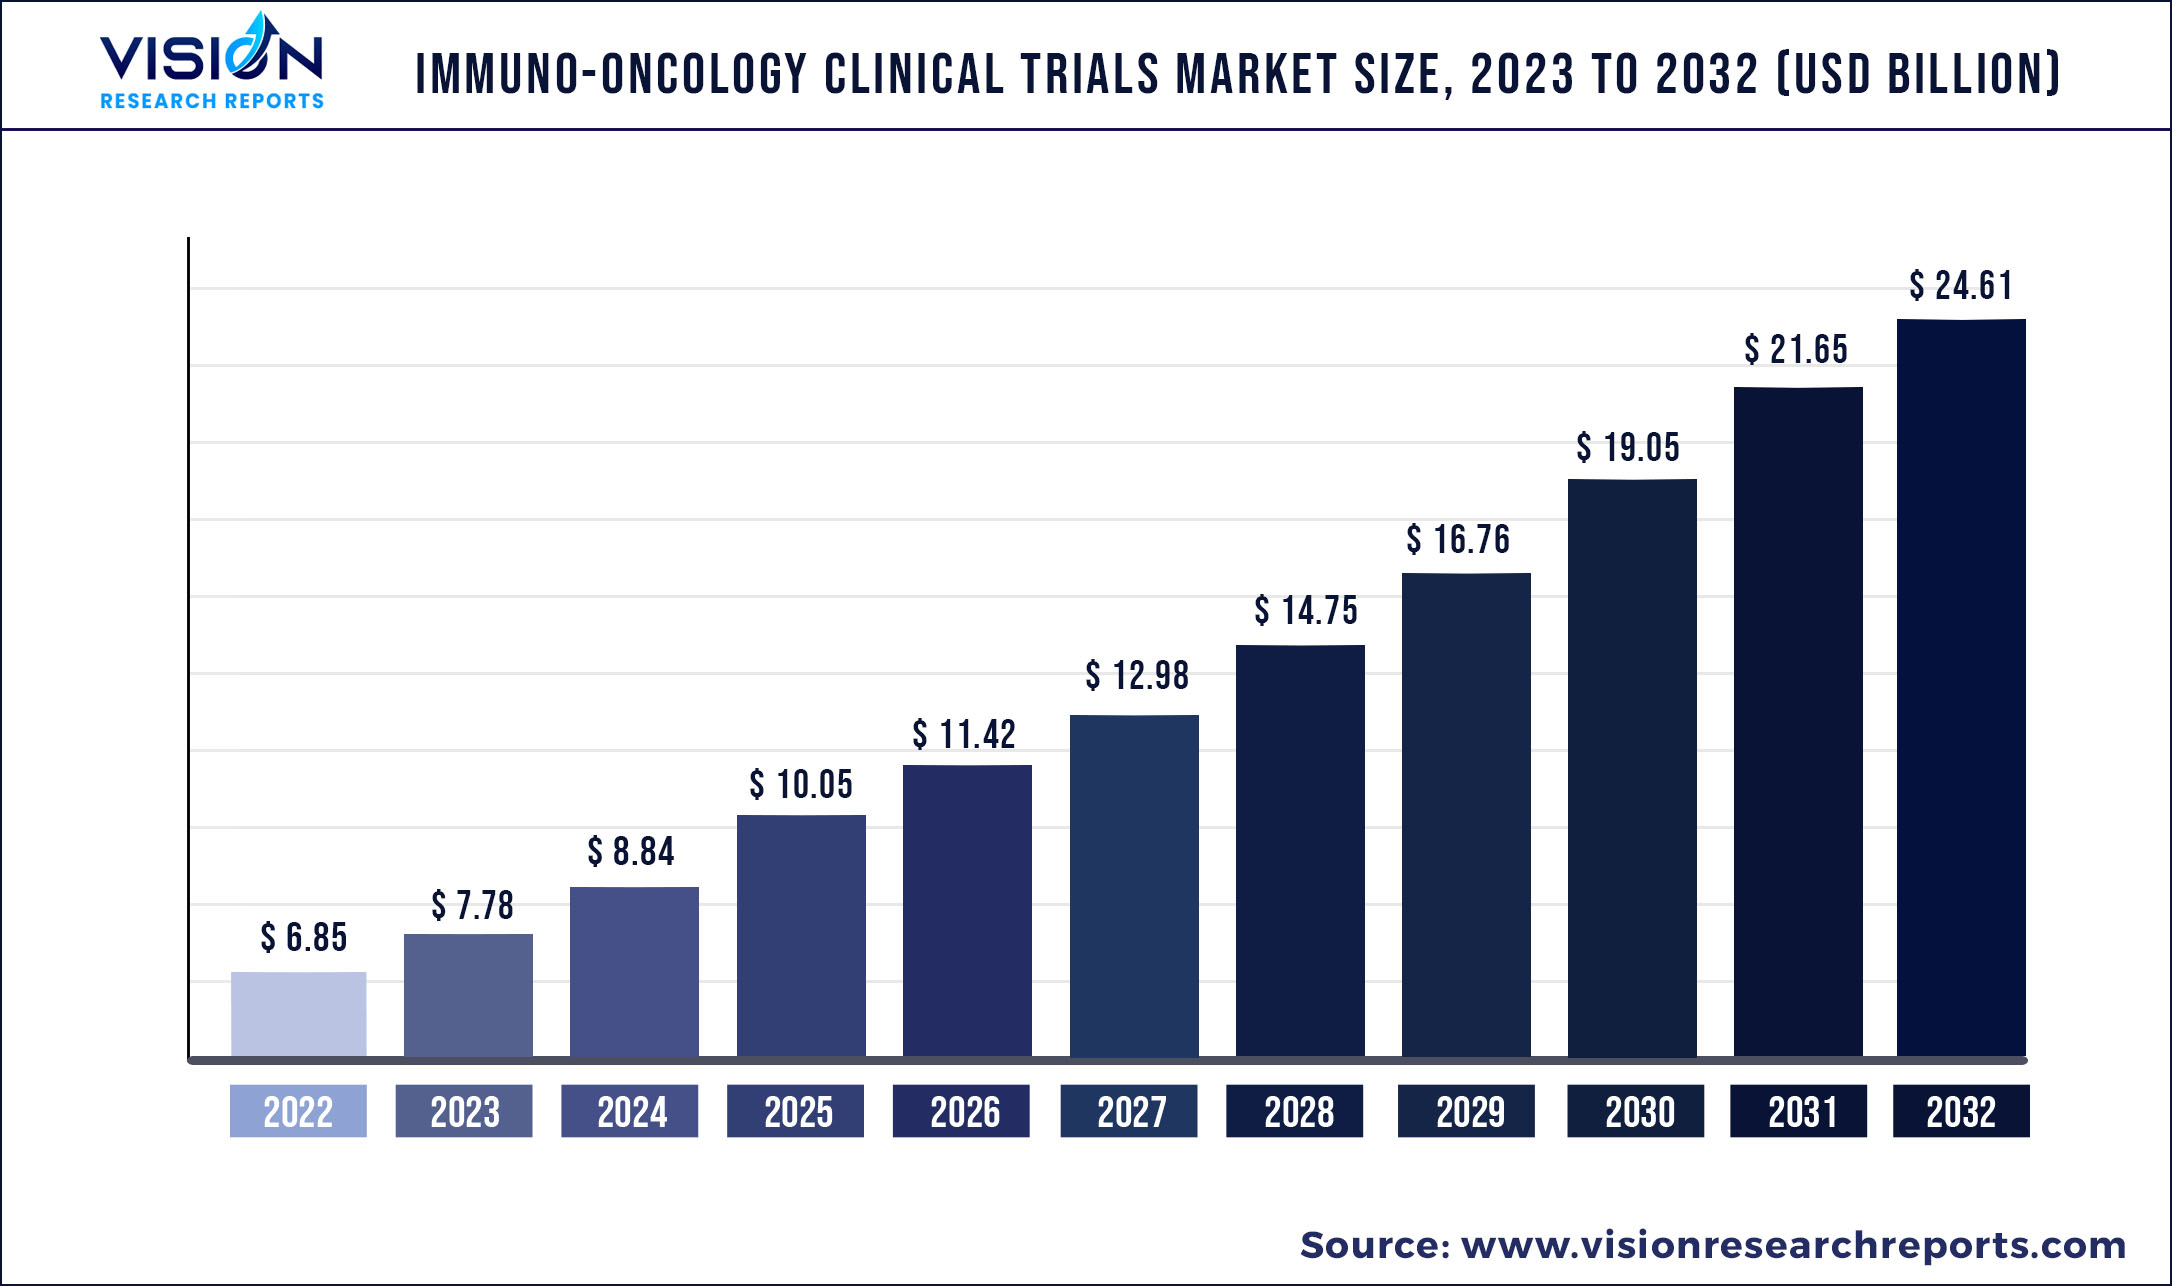 Immuno-oncology Clinical Trials Market Size 2023 to 2032